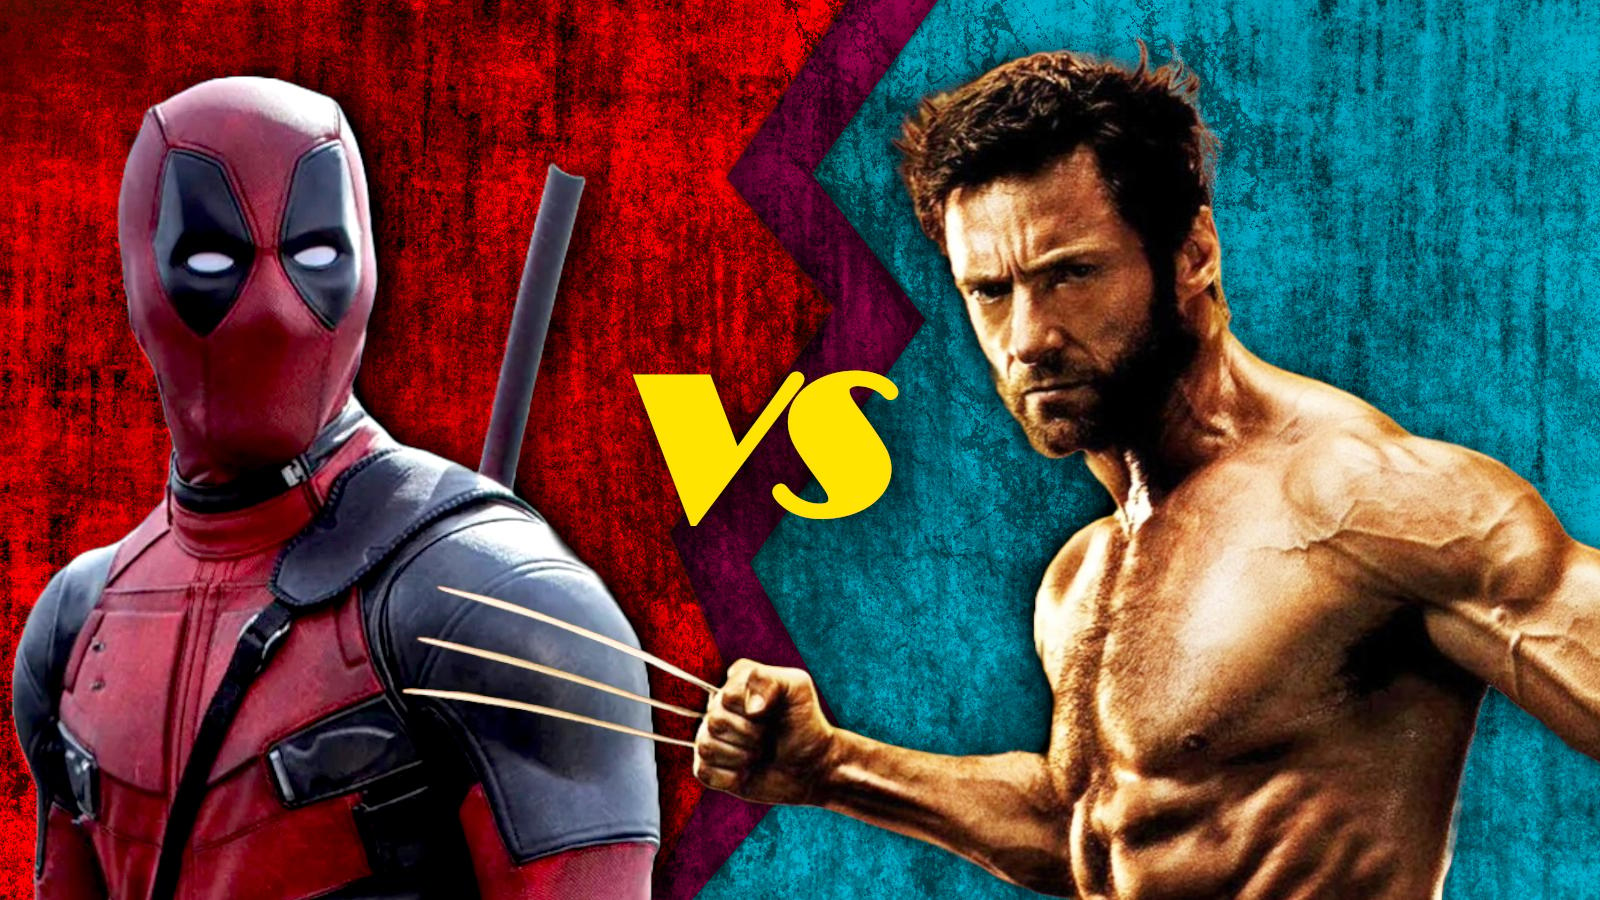 Deadpool and Wolverine facing off against one another